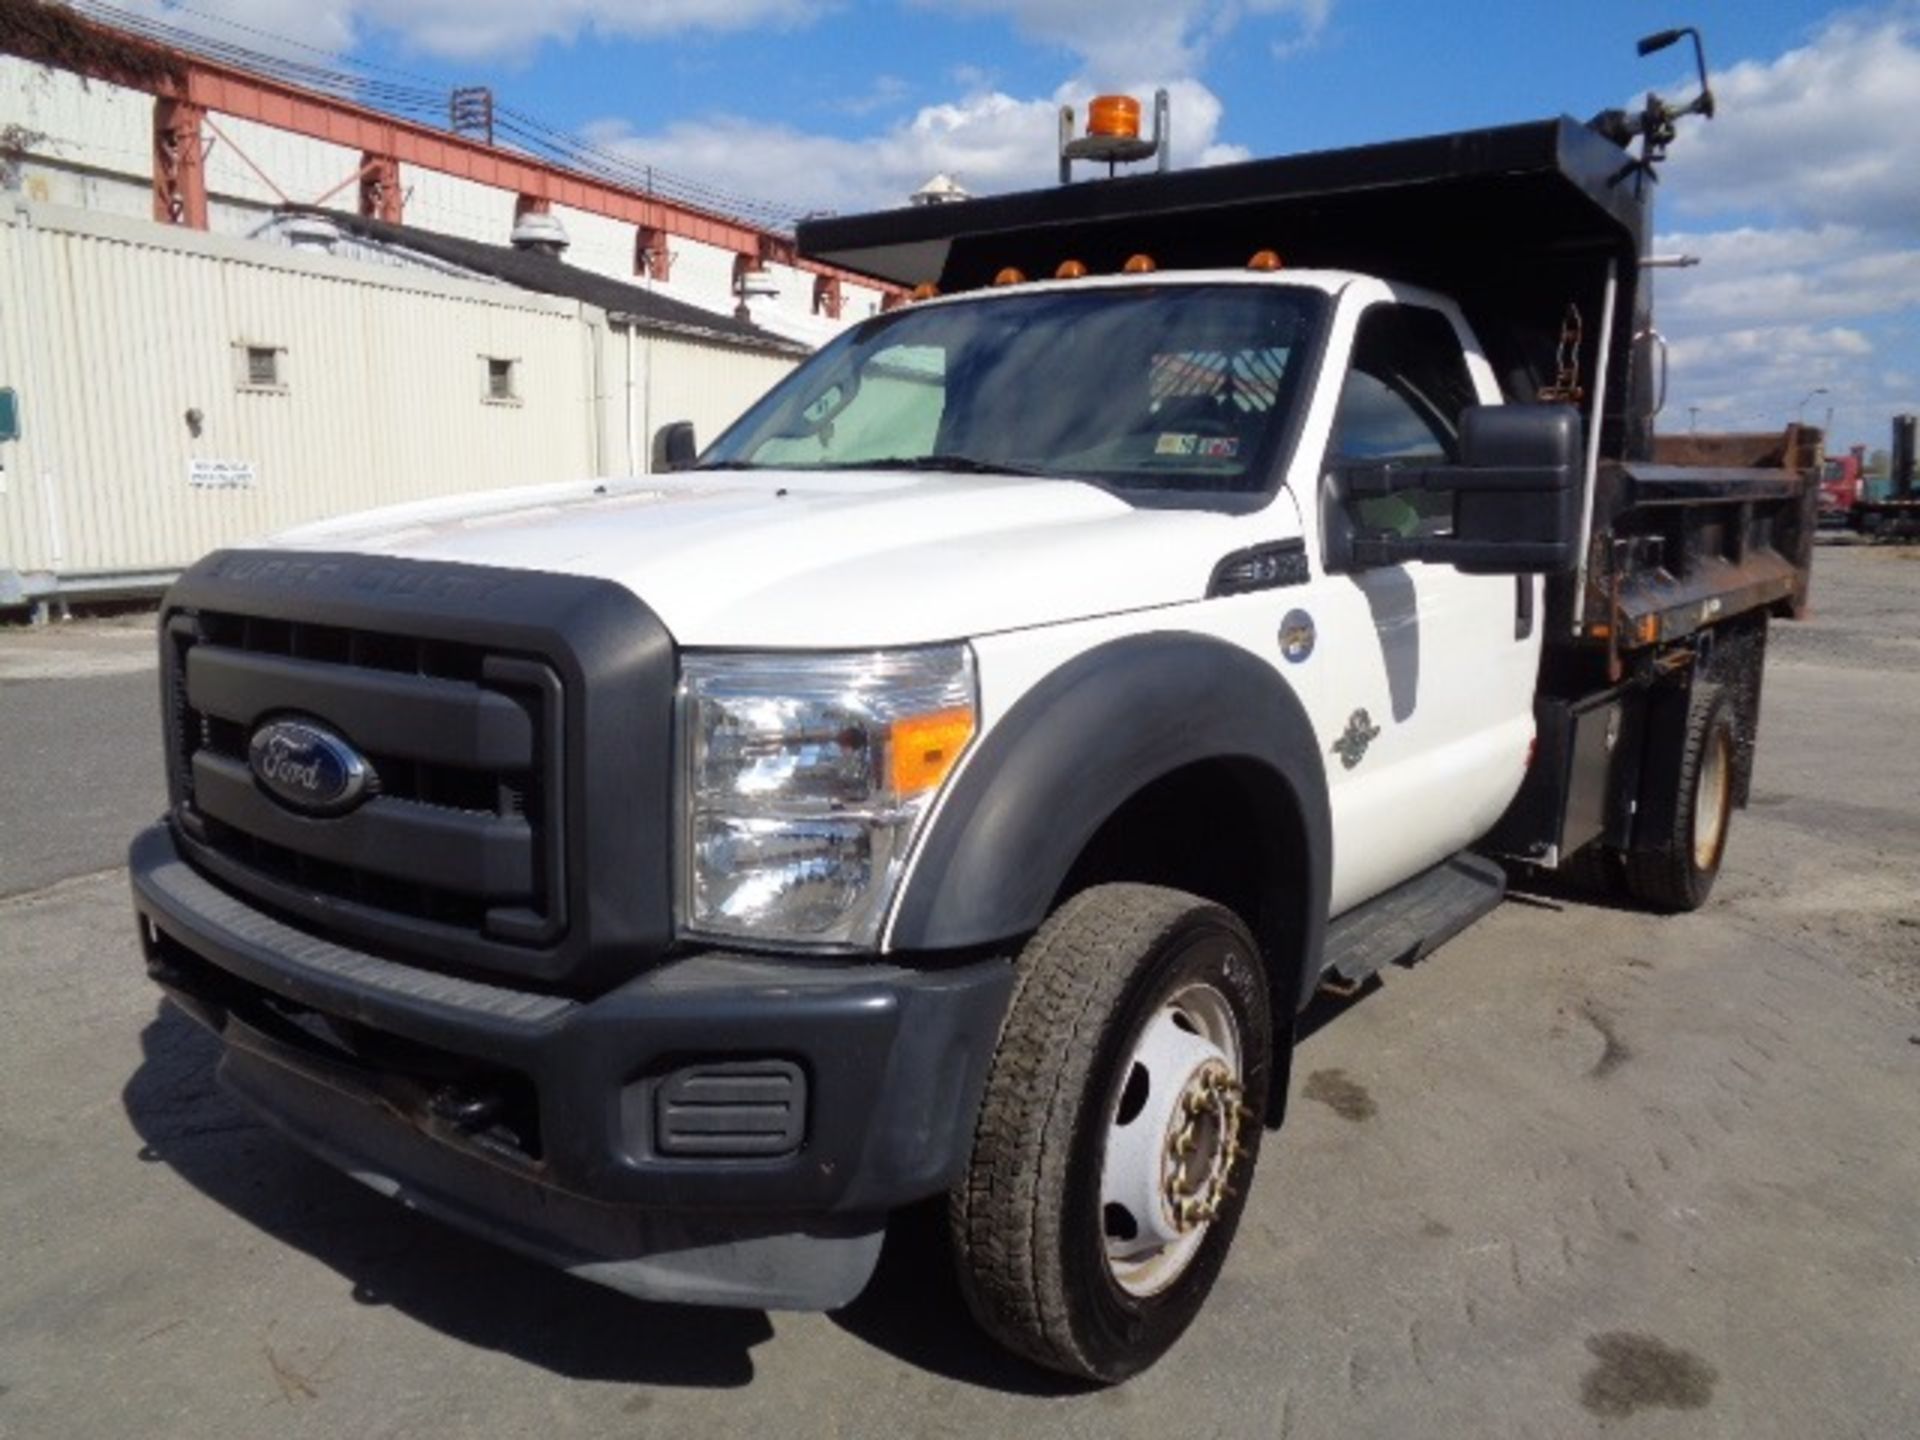 2012 Ford F550 Dump Truck - Image 7 of 19